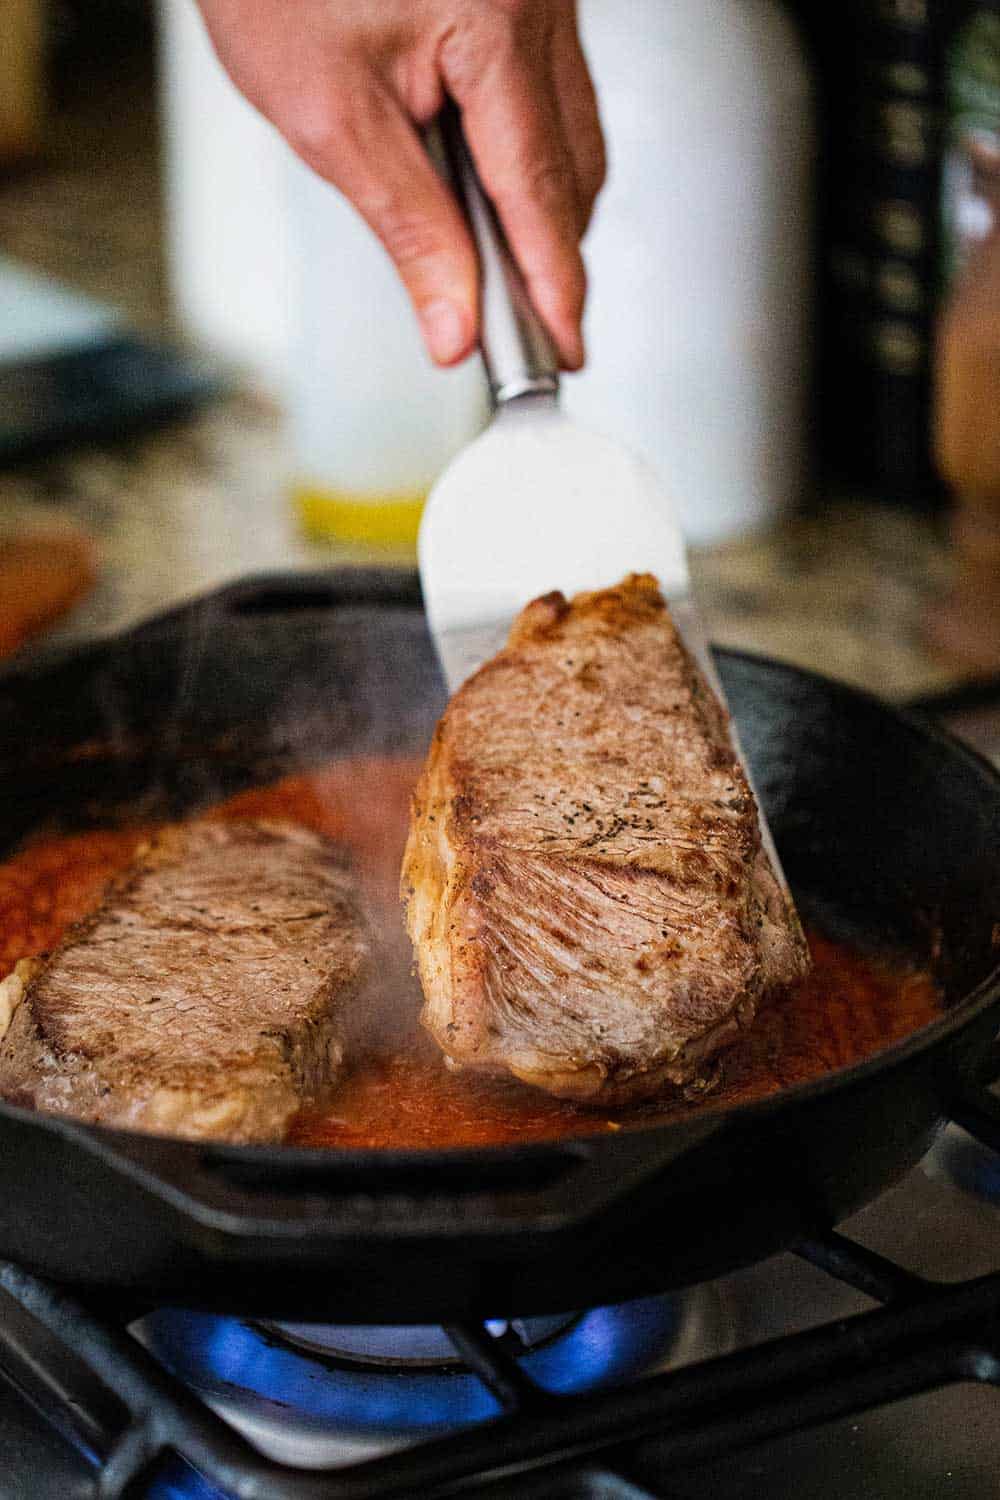 A person lowering a seared ribeye steak into a skillet filled with tomato sauce and another seared steak.